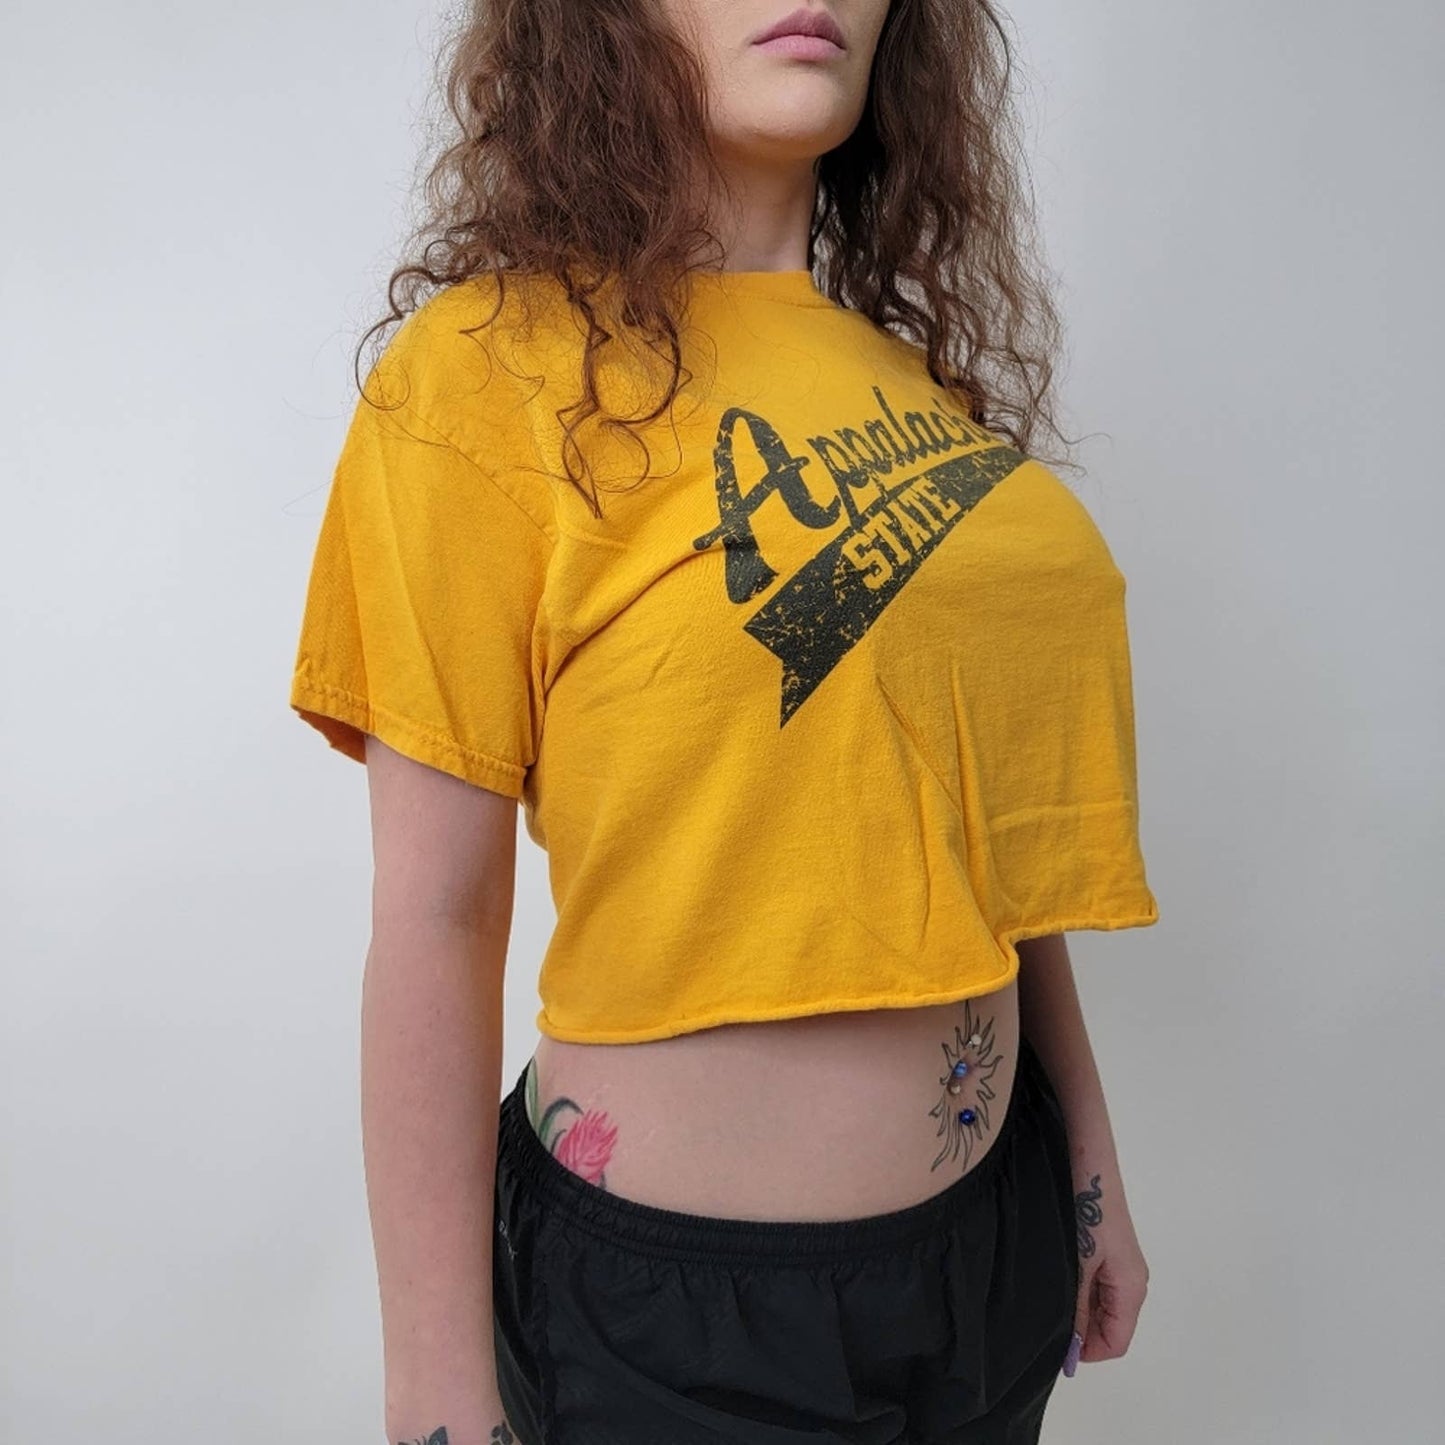 App State Cropped Tee Shirt - M